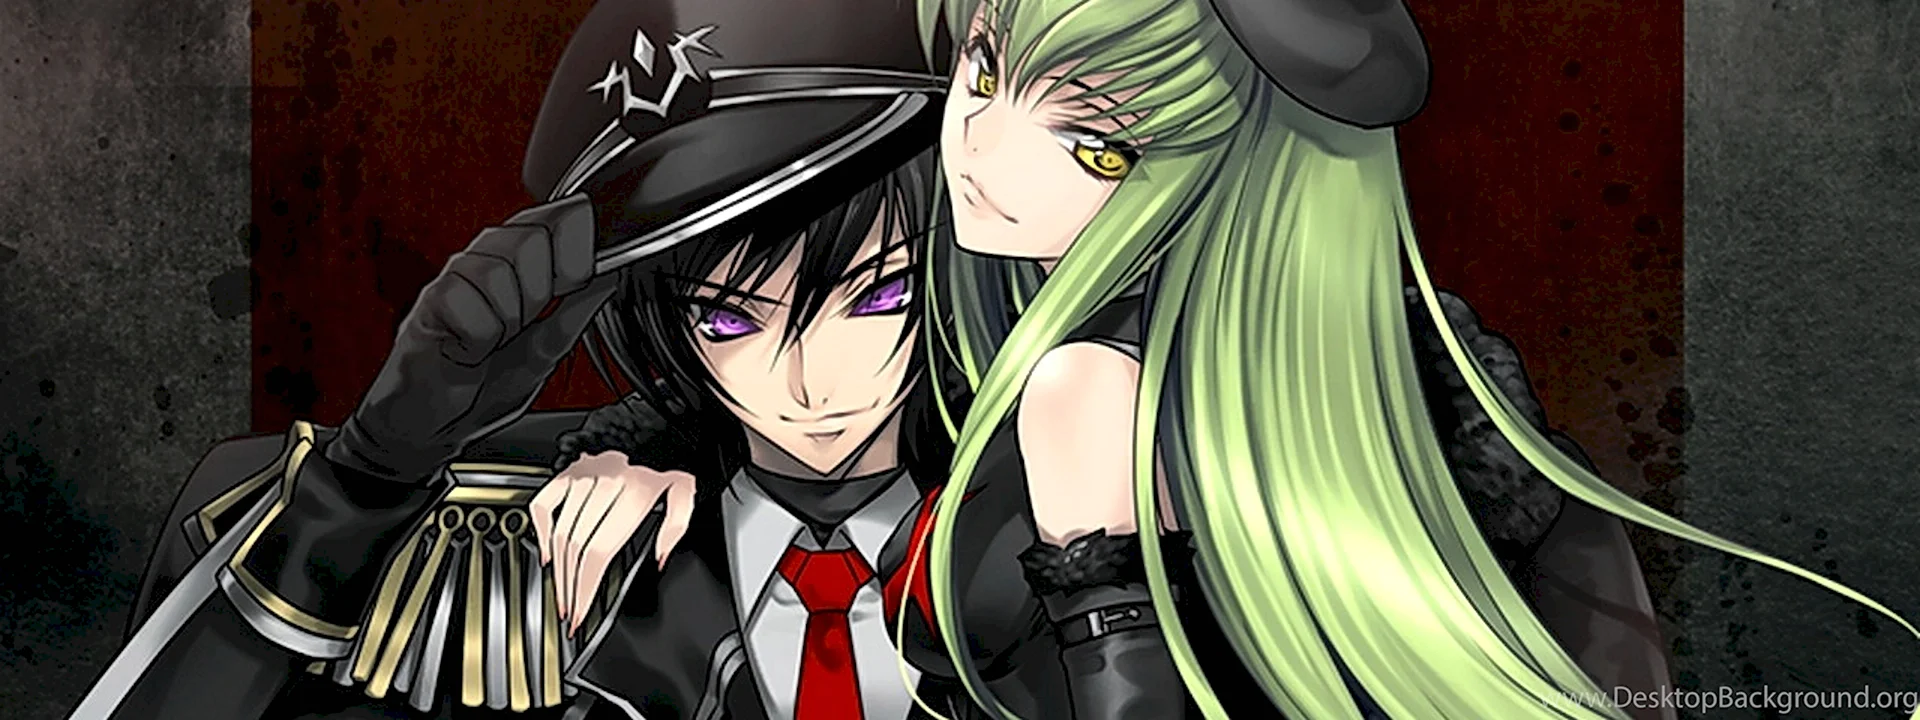 Code Geass c.c and Lelouch